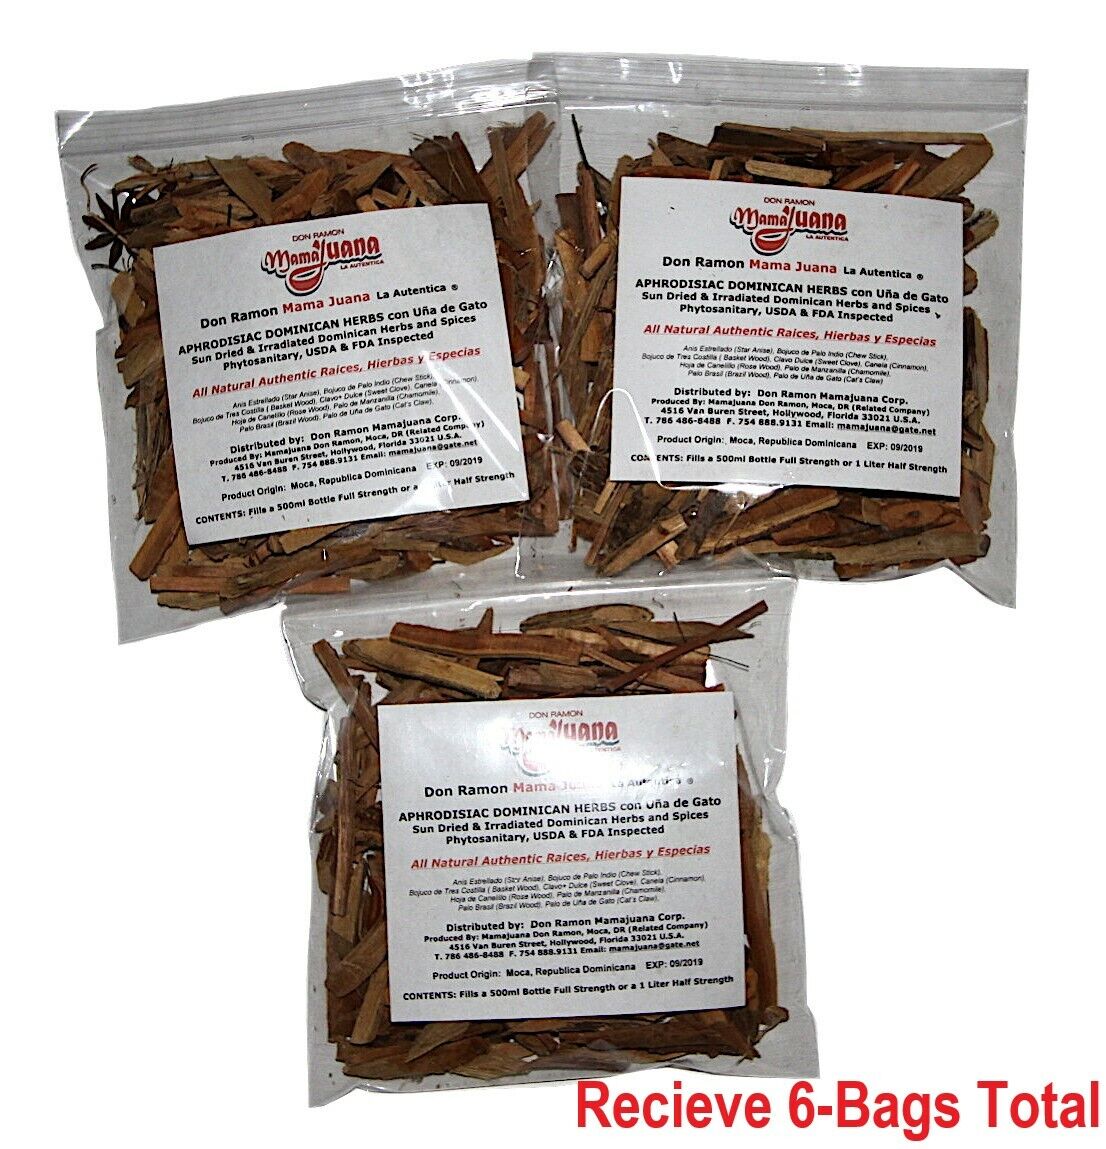 MAMAJUANA 500 SIZE DRY BAGS - BUY 3 GET 3 FREE - DIABETIC RECIPE - by DON RAMON